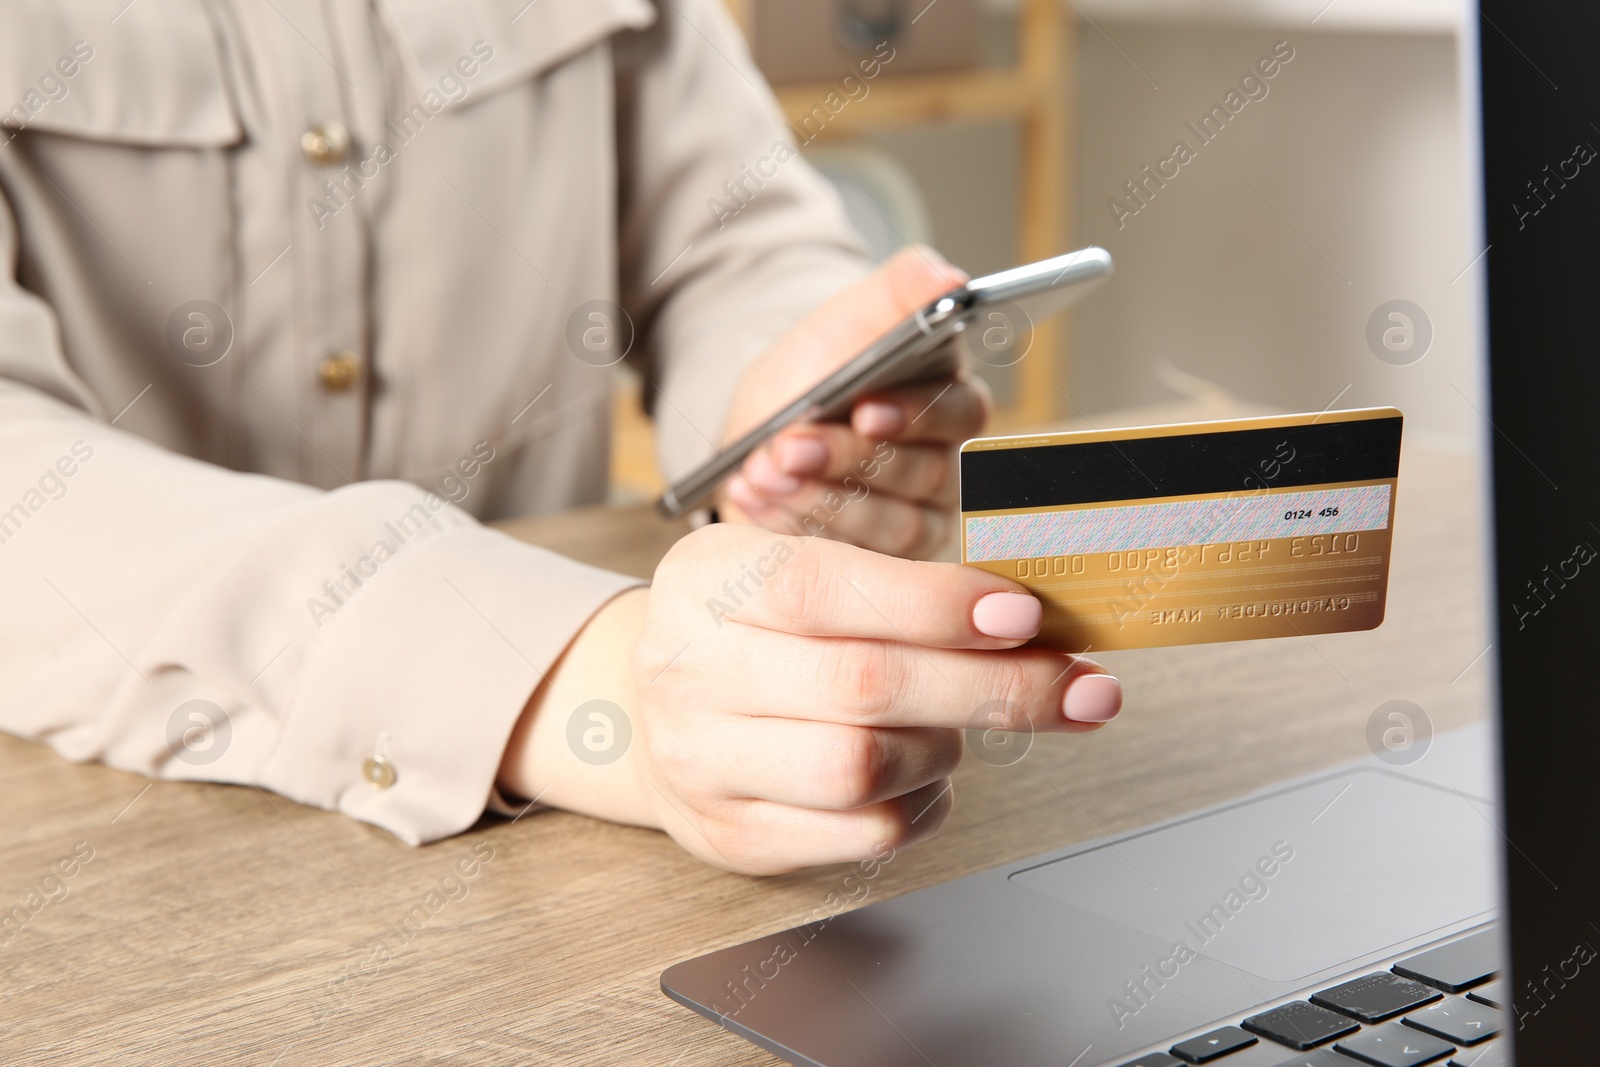 Photo of Online payment. Woman using smartphone and credit card near laptop at wooden table indoors, closeup